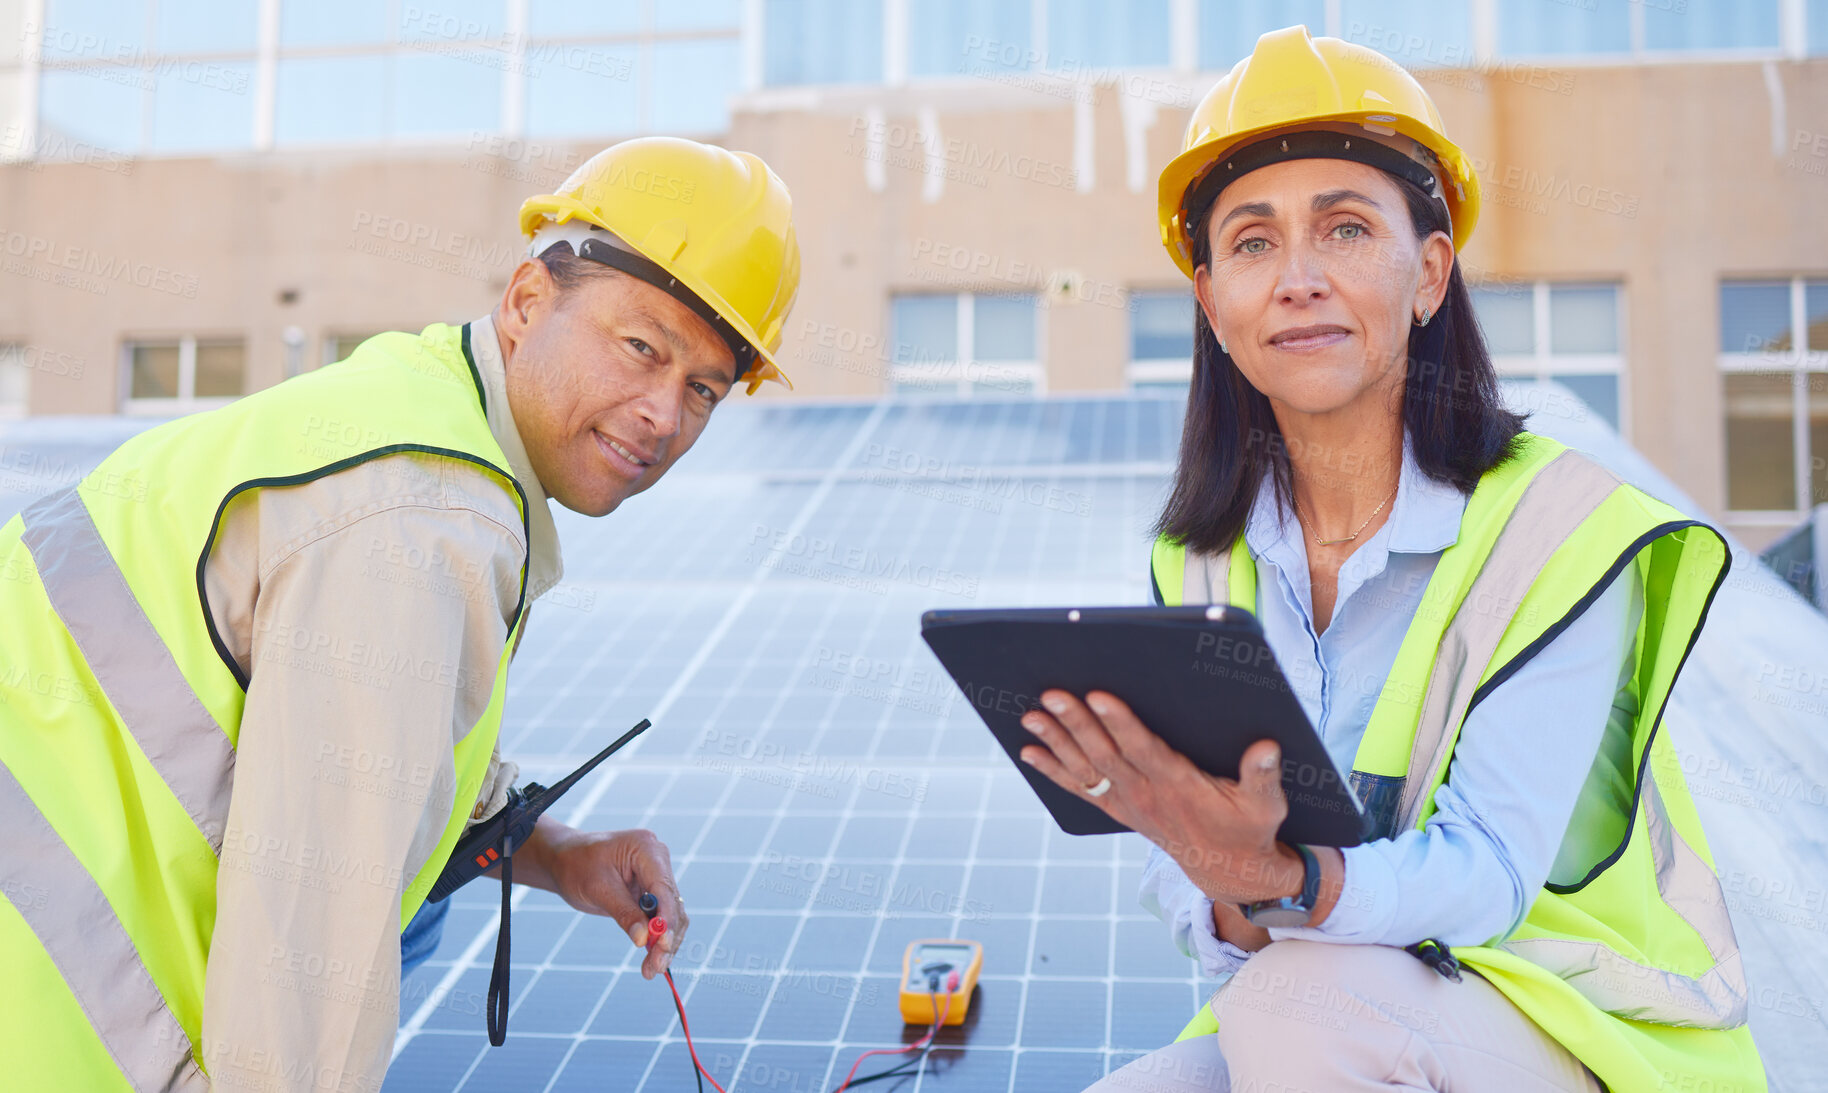 Buy stock photo Tablet, solar energy or engineering team working solar panels or technology on rooftop for renewable energy. Teamwork, portrait or construction workers on a city building for maintenance inspection